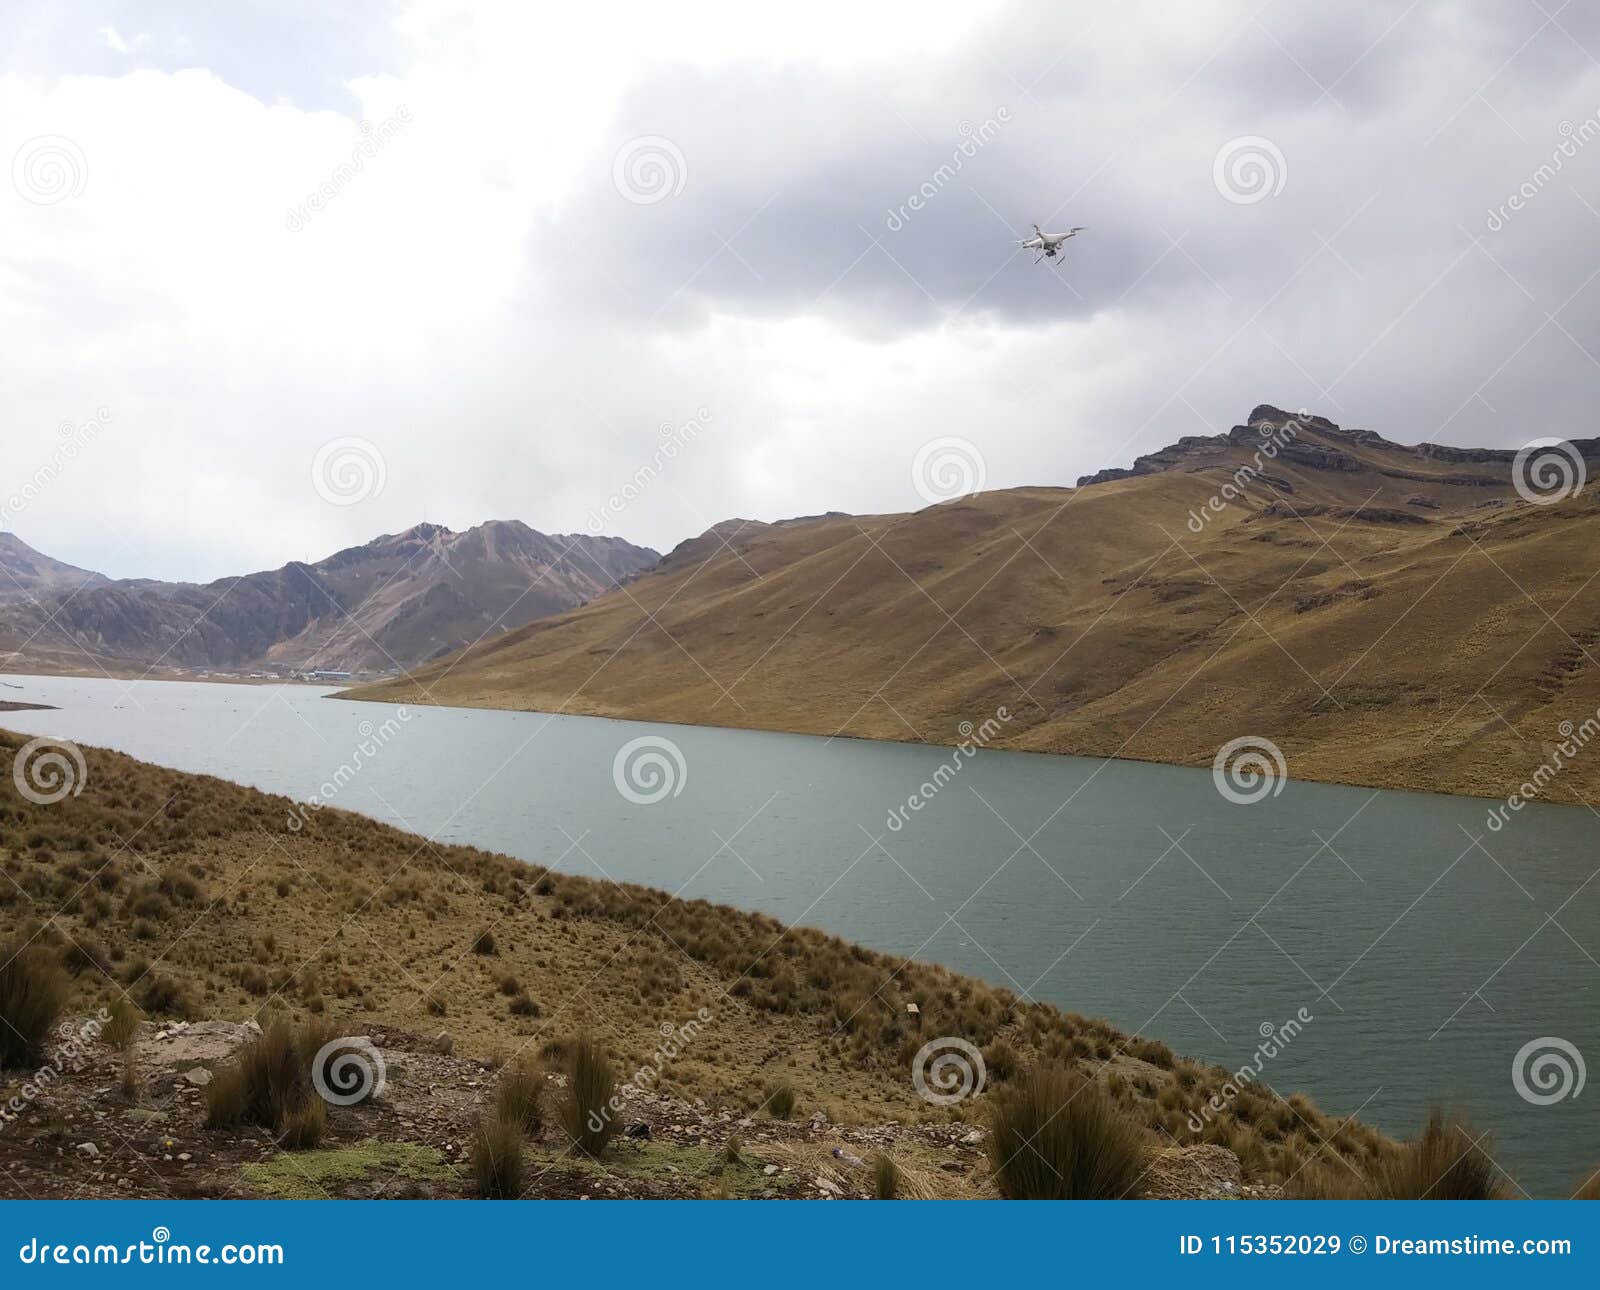 lagoon in the andes of peru